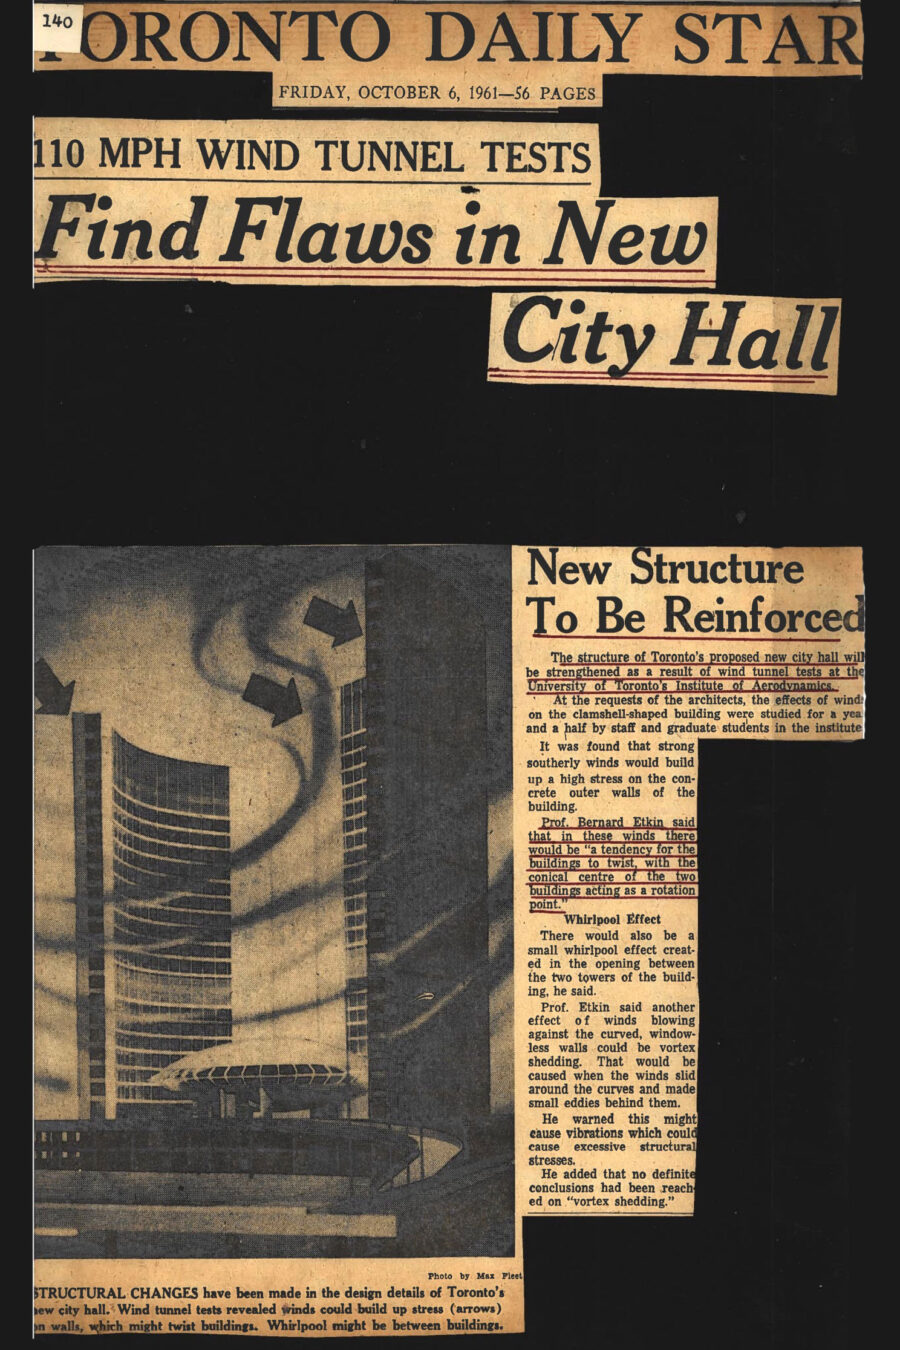 Newspaper clipping from The Toronto Daily Star, October 6, 1961

Headline: 110 mph Wind Tunnel Tests Find Flaws in New City Hall

Photo in clipping: Close-up image of model of Toronto’s new City Hall, illustrated with wind currents and arrows indicating the wind’s direction

Caption: Structural changes have been made in the design details of Toronto’s new city hall. Wind tunnel tests revealed wind could build up stress (arrows) on walls, which might twist buildings. Whirlpool might be between buildings.

Sub-headline: New Structure to be Reinforced

The article outlines how the structure of Toronto’s proposed new city hall will be strengthened as a result of wind tunnel tests at the University of Toronto’s Institute for Aerospace Studies. At the request of the architects, the effects of wind on the clamshell-shaped building were studied for a year and a half by staff and graduate students at the institute.

It was found that strong southerly winds would build up a high stress on the concrete outer walls of the building. Professor Bernard Etkin detailed how high winds would cause the buildings to twist, with the conical centre of the two buildings acting as a rotation point. Other wind effects could include a small whirlpool effect in the opening between the two building towers, and vortex shedding, when the winds blew around the curved, windowless walls of the buildings, potentially causing excessive structural stress.